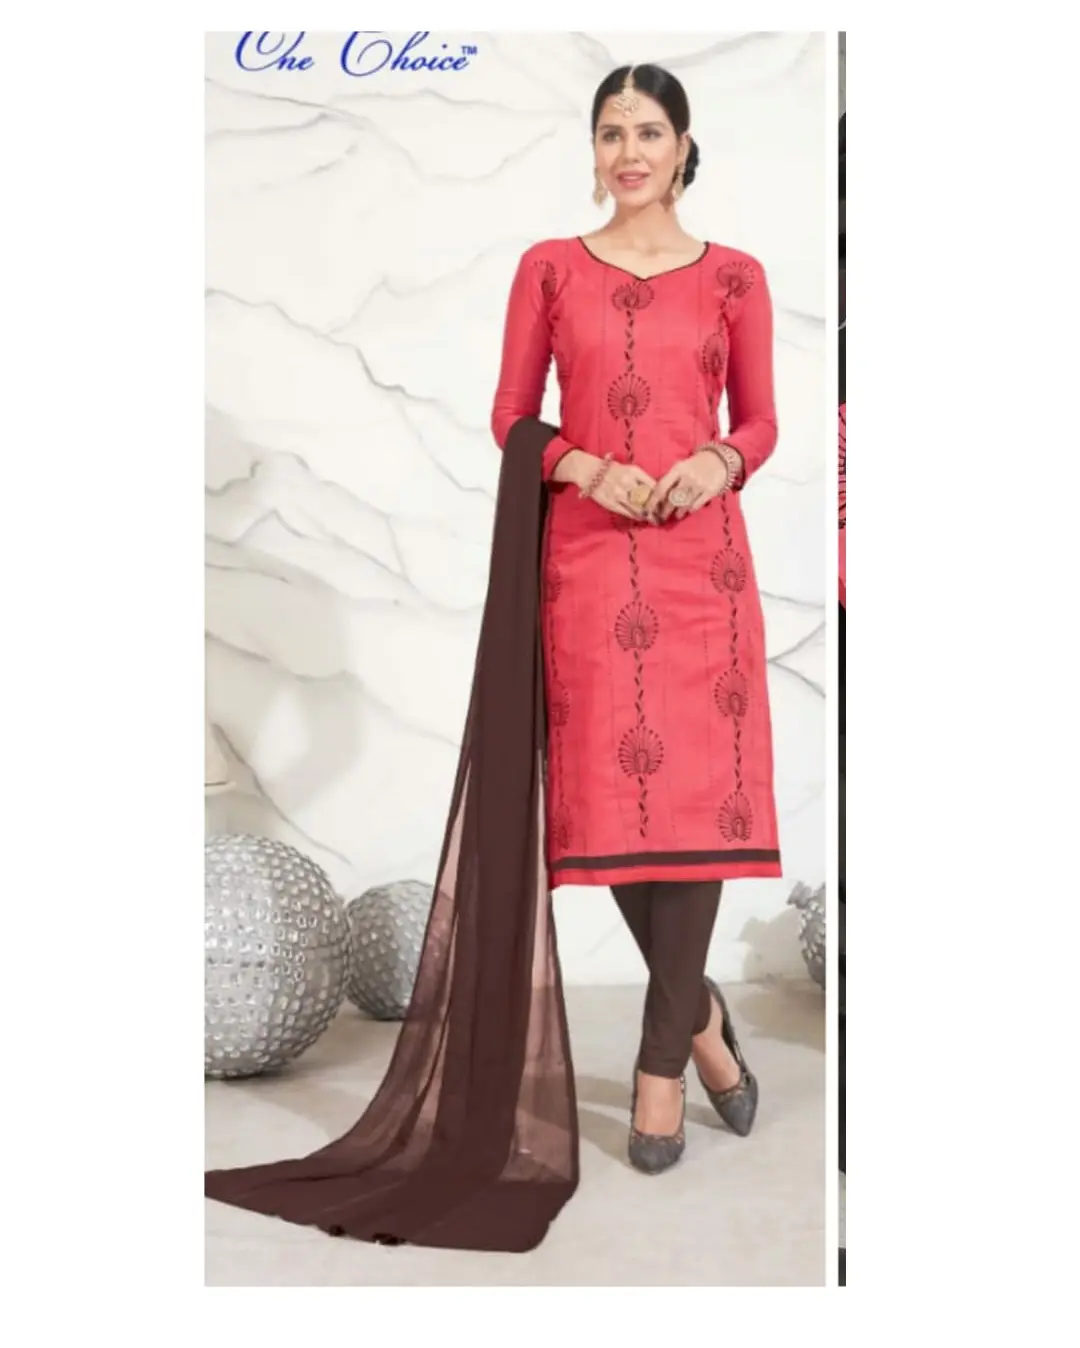 Lovely Women's Embroidered Chanderi Cotton Readymade Chudidar Salwar Suit Dress Material with Chiffon Dupatta By Royal Export